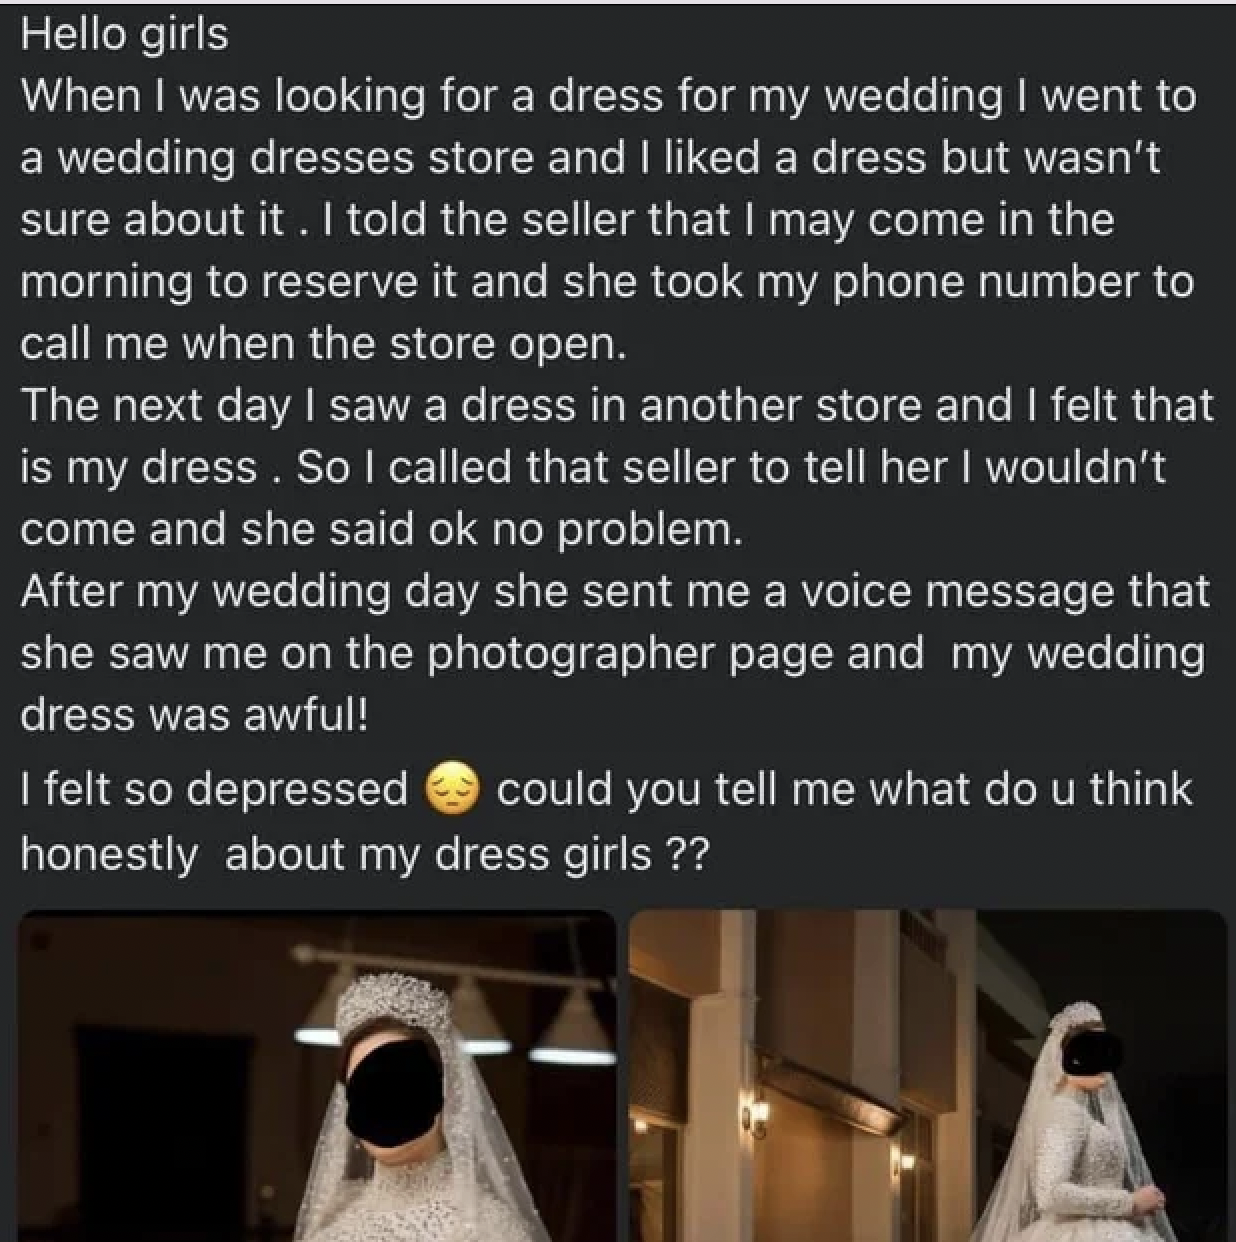 Trashy Weddings Moments - duke's alehouse and kitchen - Hello girls When I was looking for a dress for my wedding I went to a wedding dresses store and I d a dress but wasn't sure about it. I told the seller that I may come in the morning to reserve it an